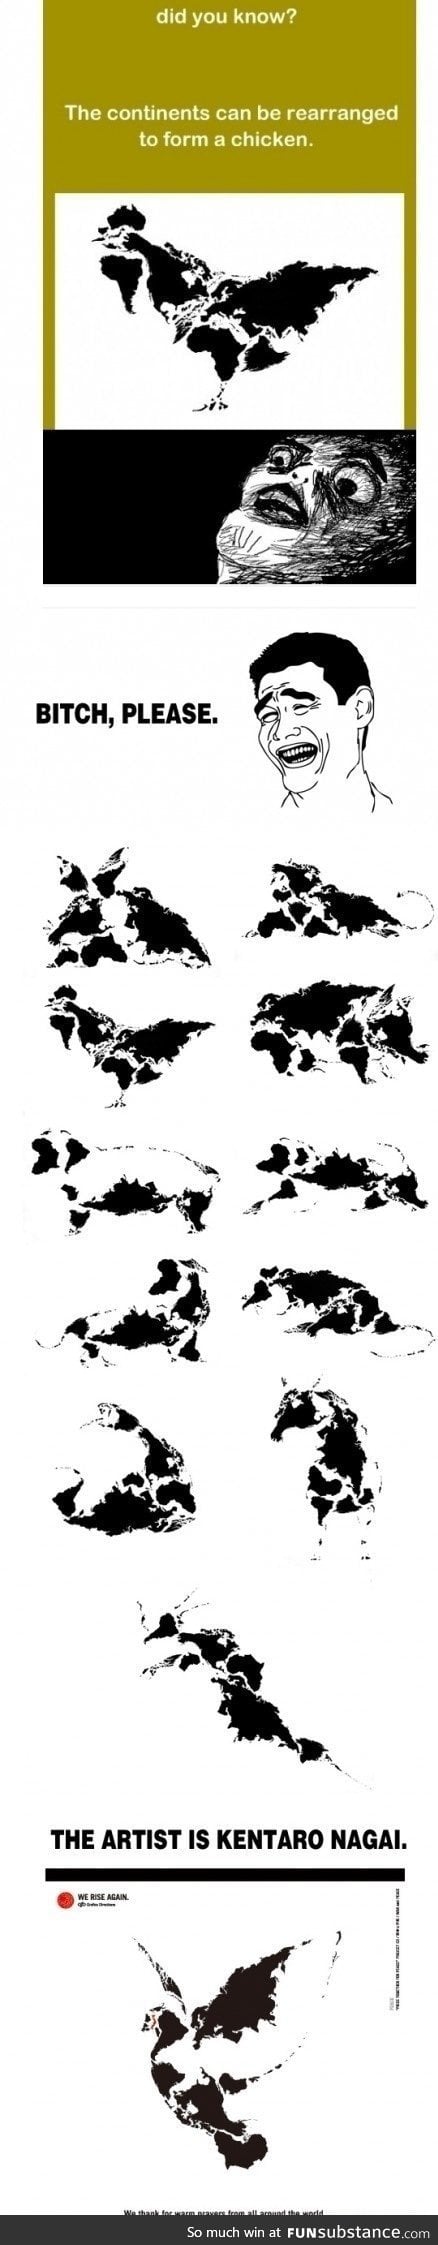 Continents arranged to form animals